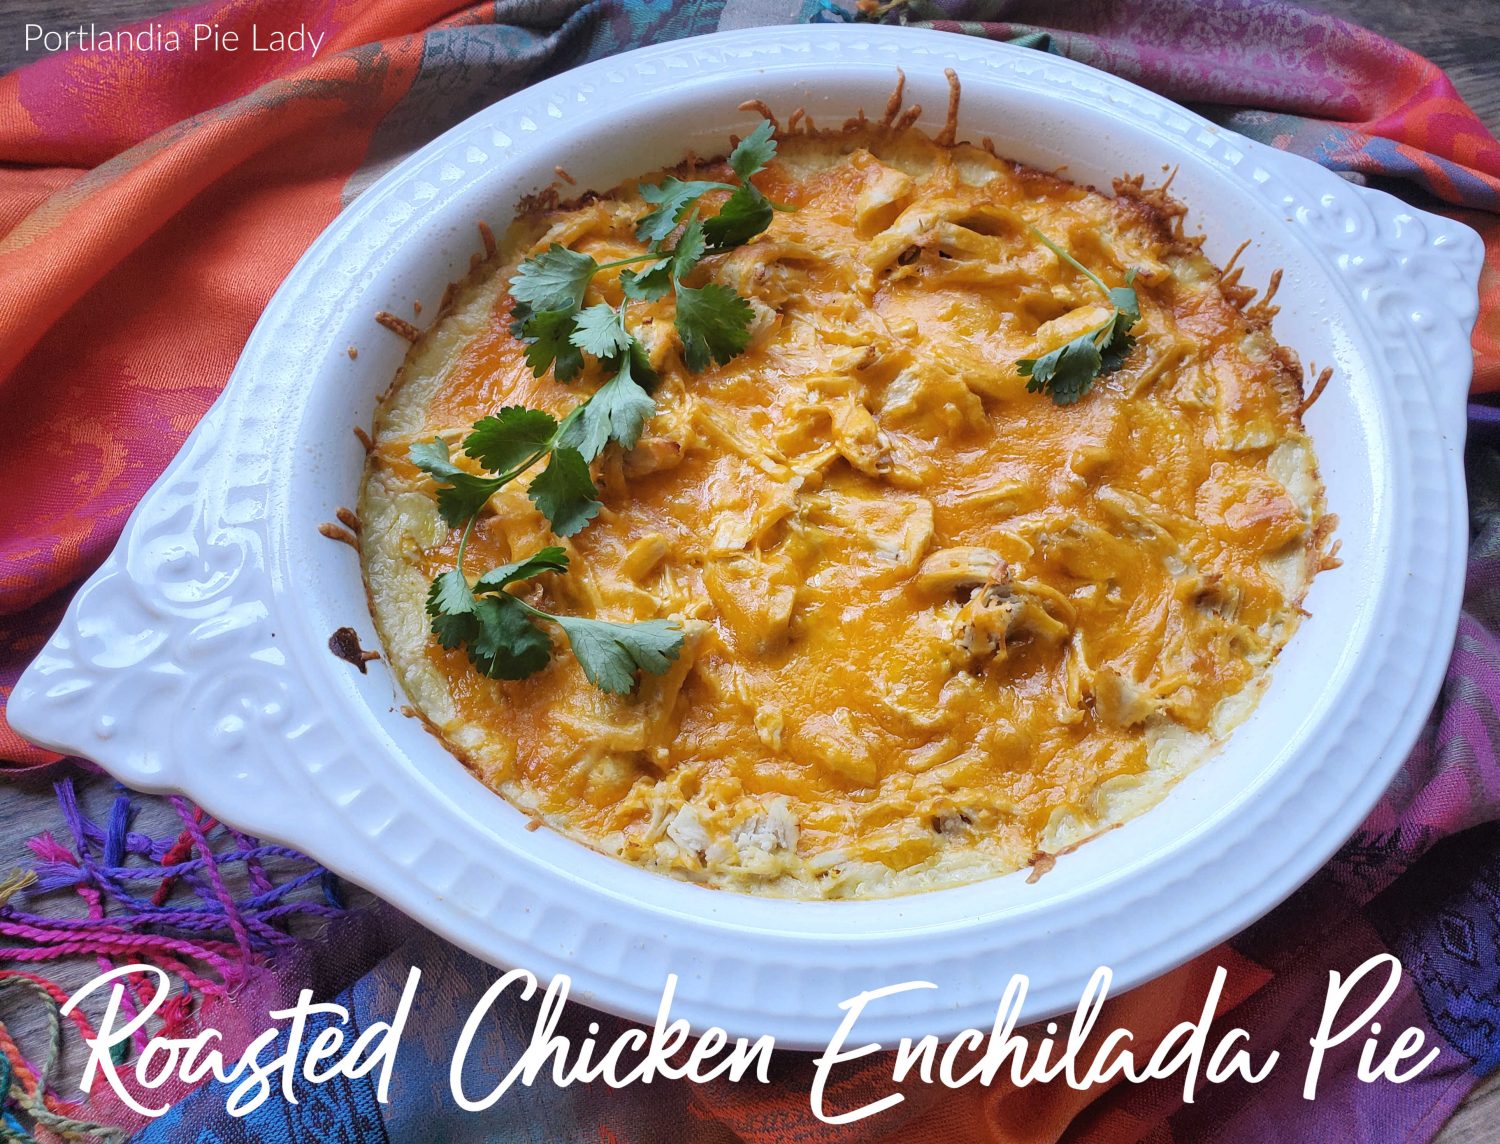 Roasted chicken & green chilies, smothered in loads of melted cheese, layered with corn tortillas and a creamy enchilada sauce; comfort food Mexican style.